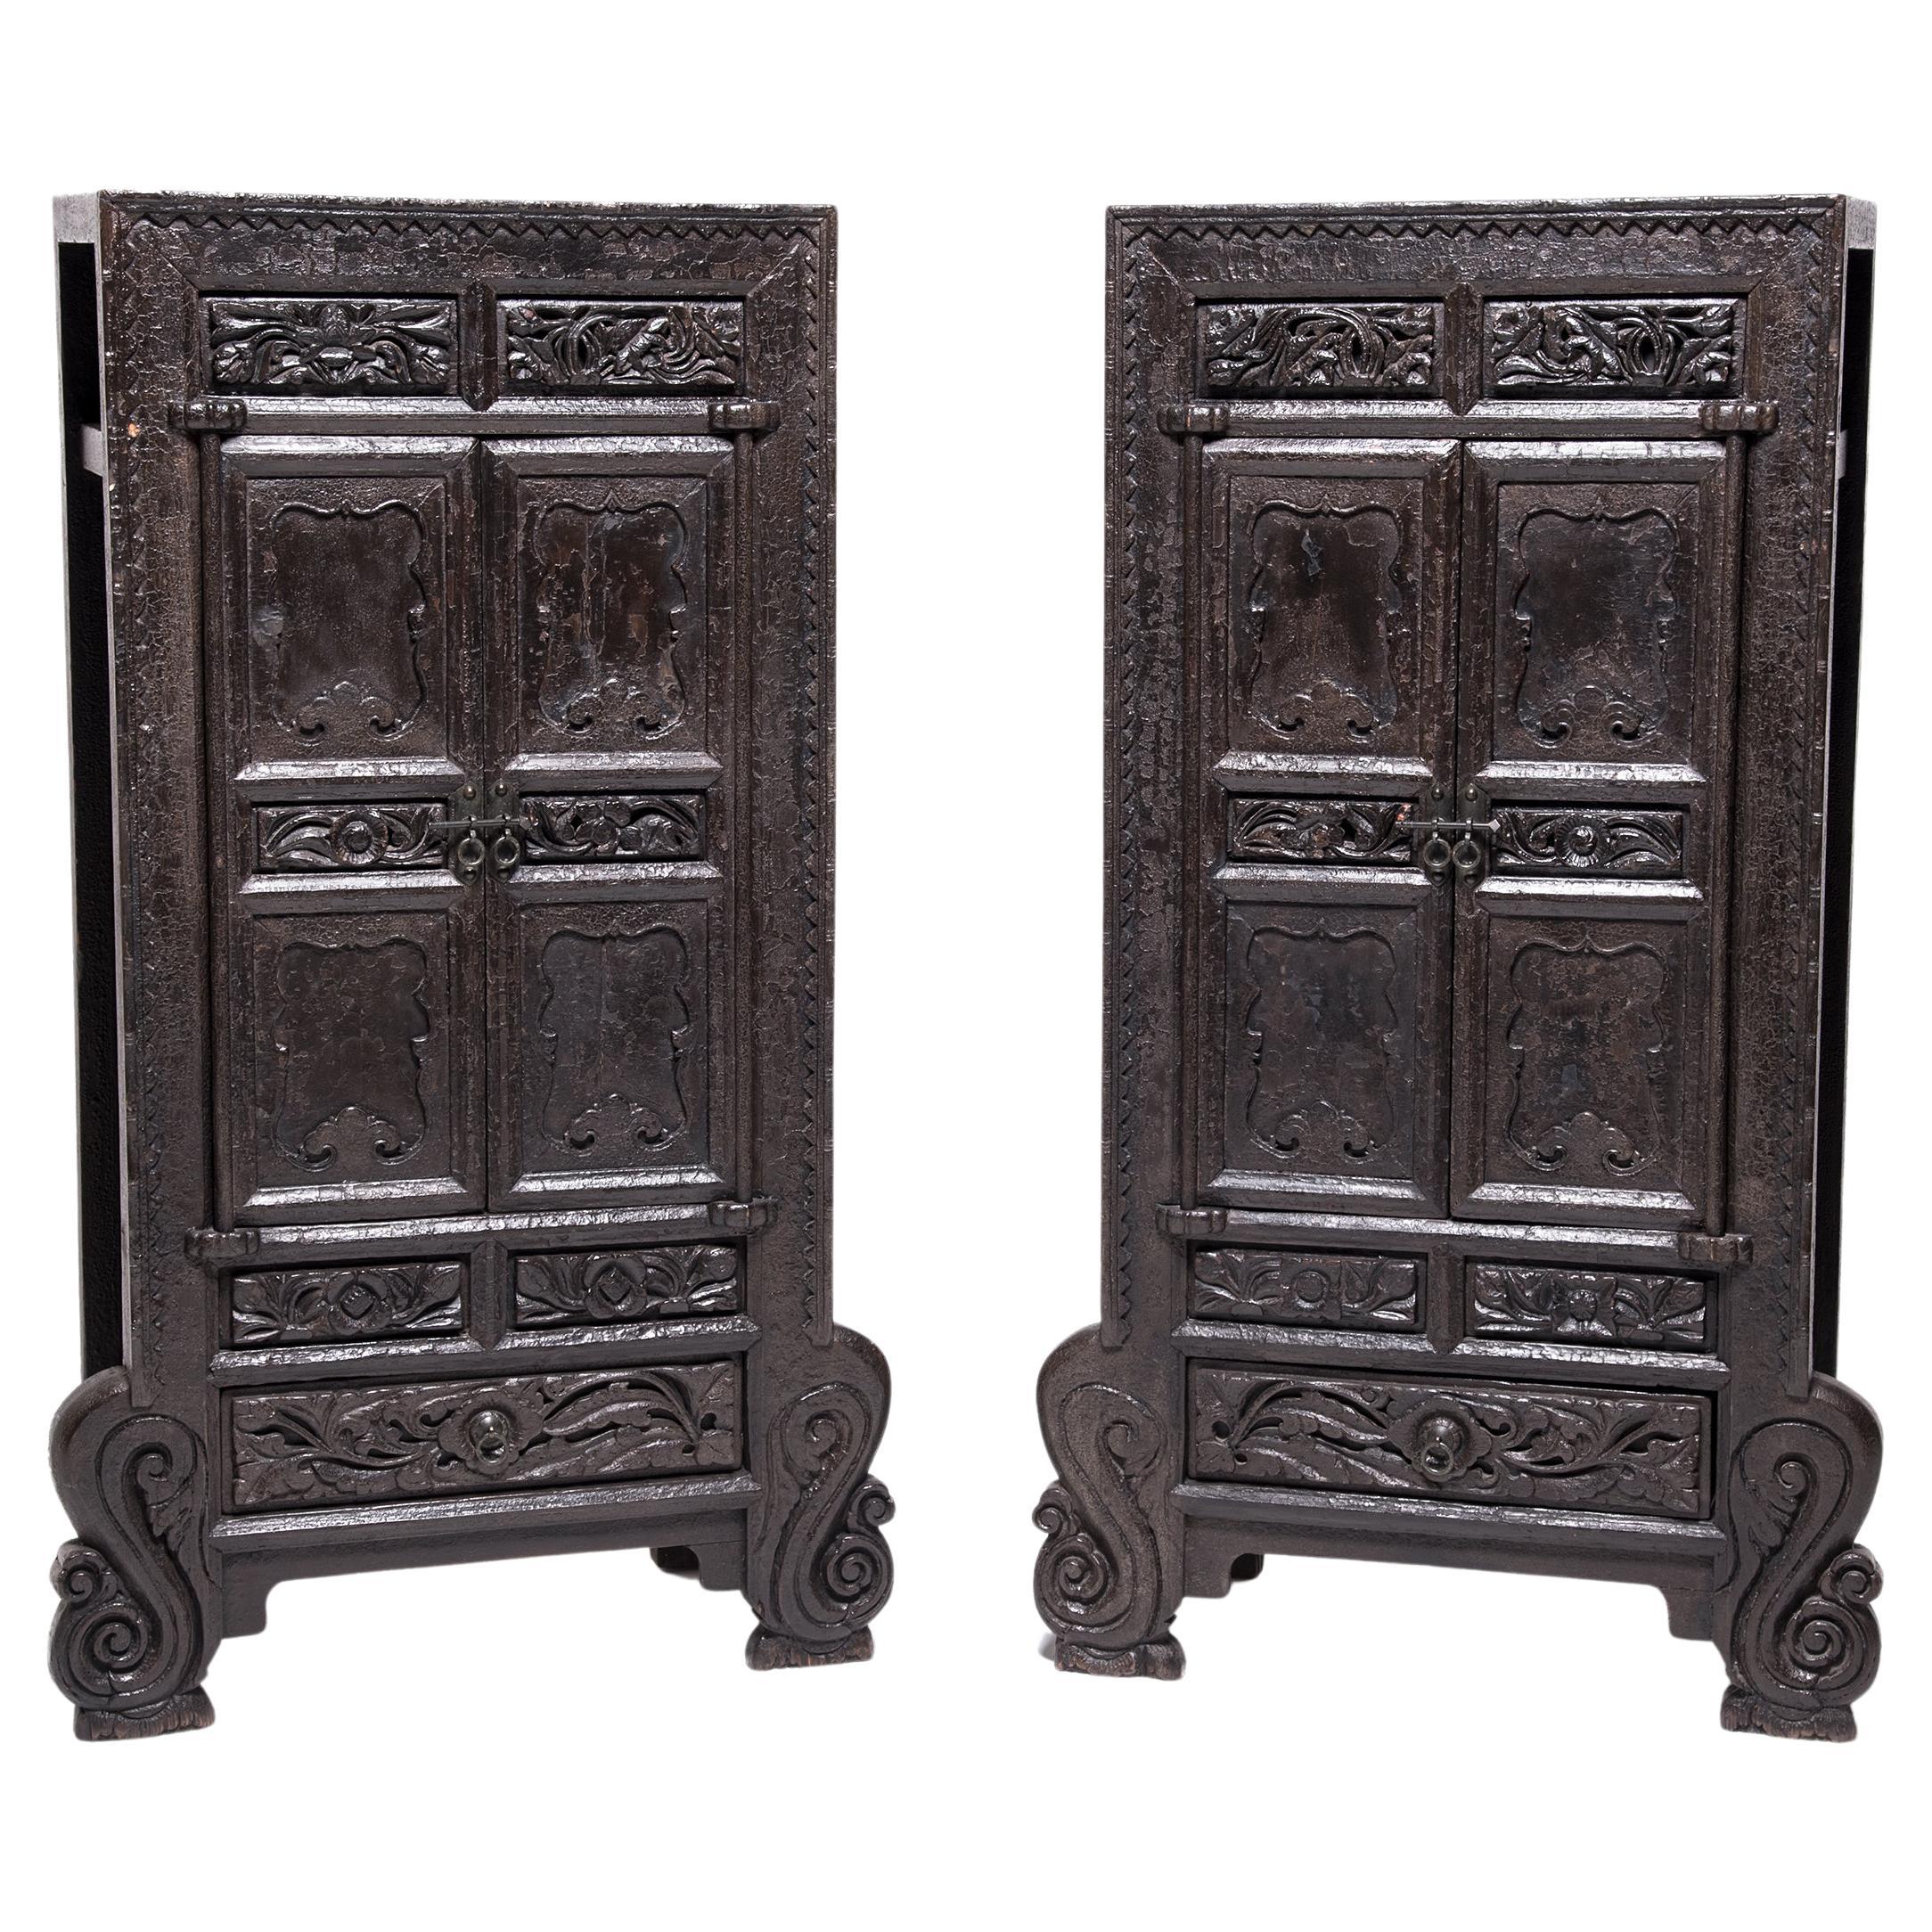 Pair of Ornate Lacquered Cabinets with Cabriole Legs, c. 1850 For Sale